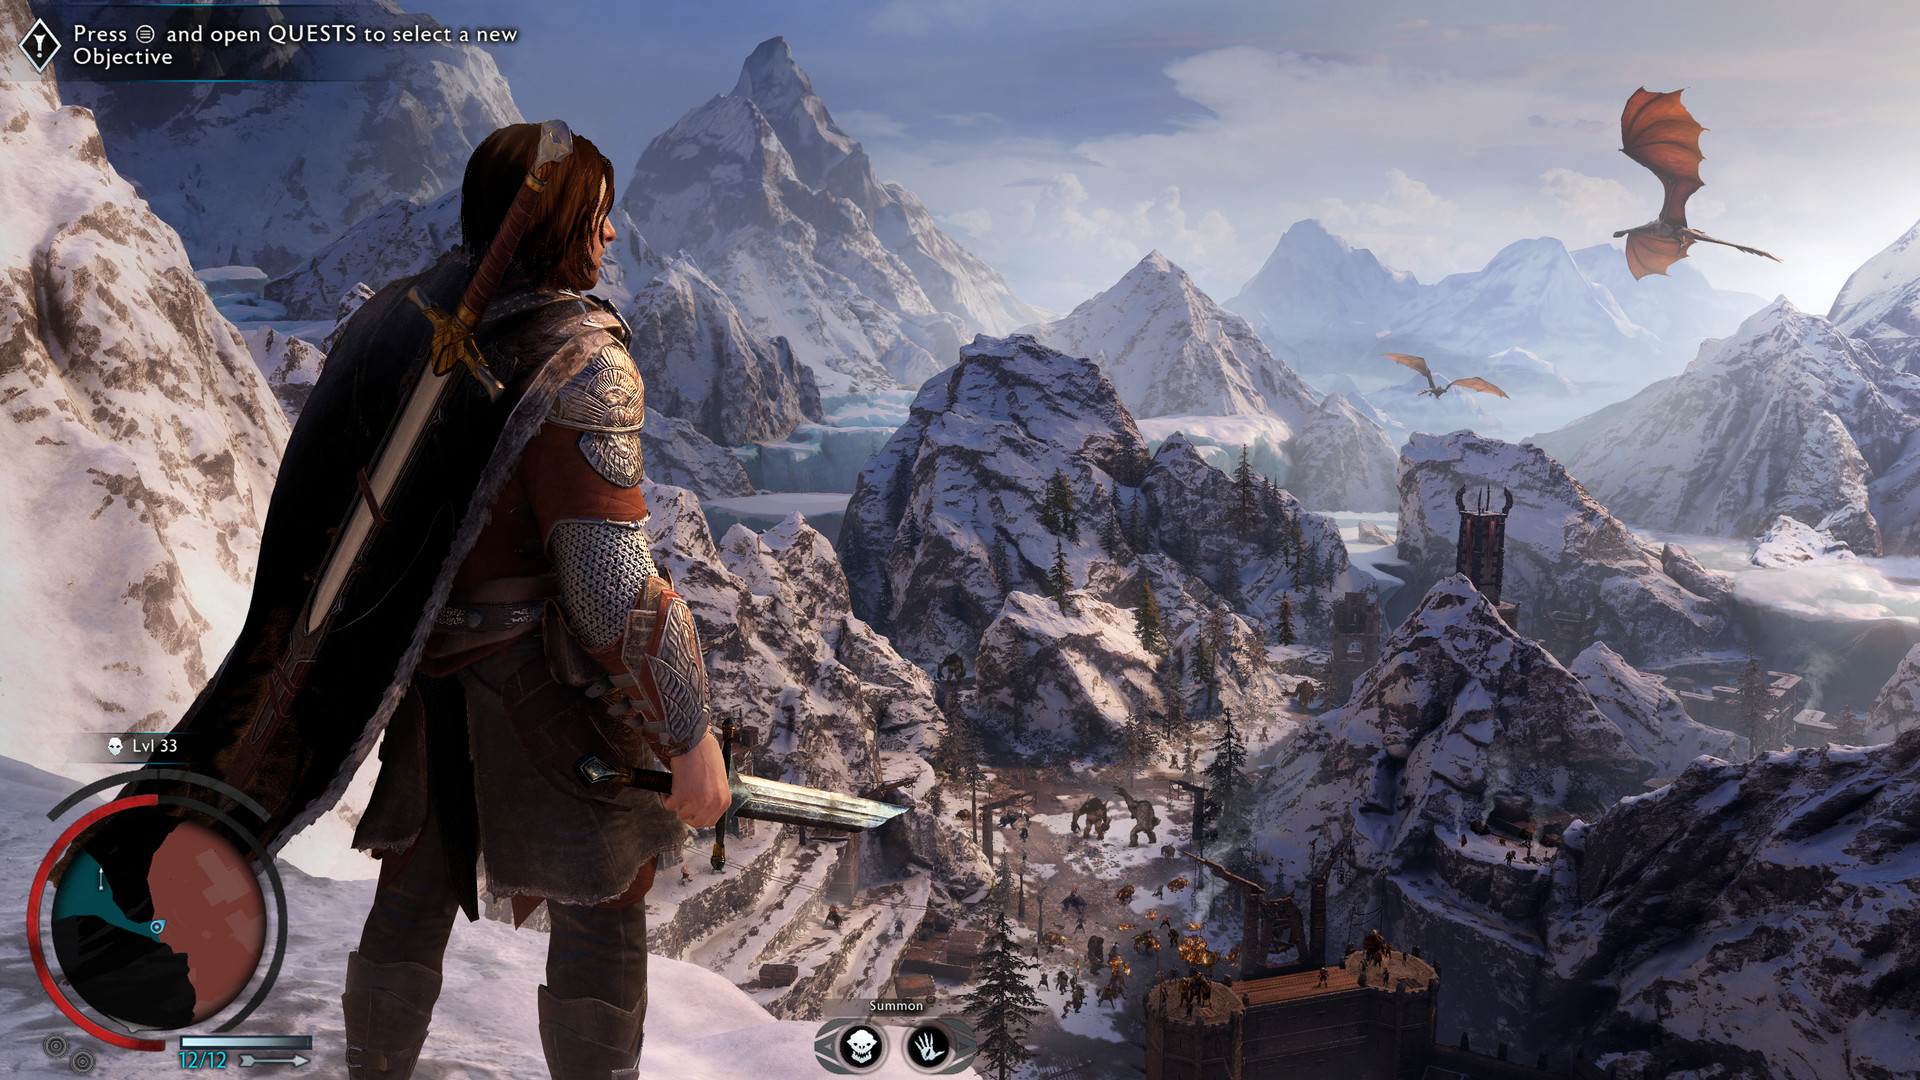 Middle-earth: Shadow of Mordor System Requirements - Can I Run It? -  PCGameBenchmark